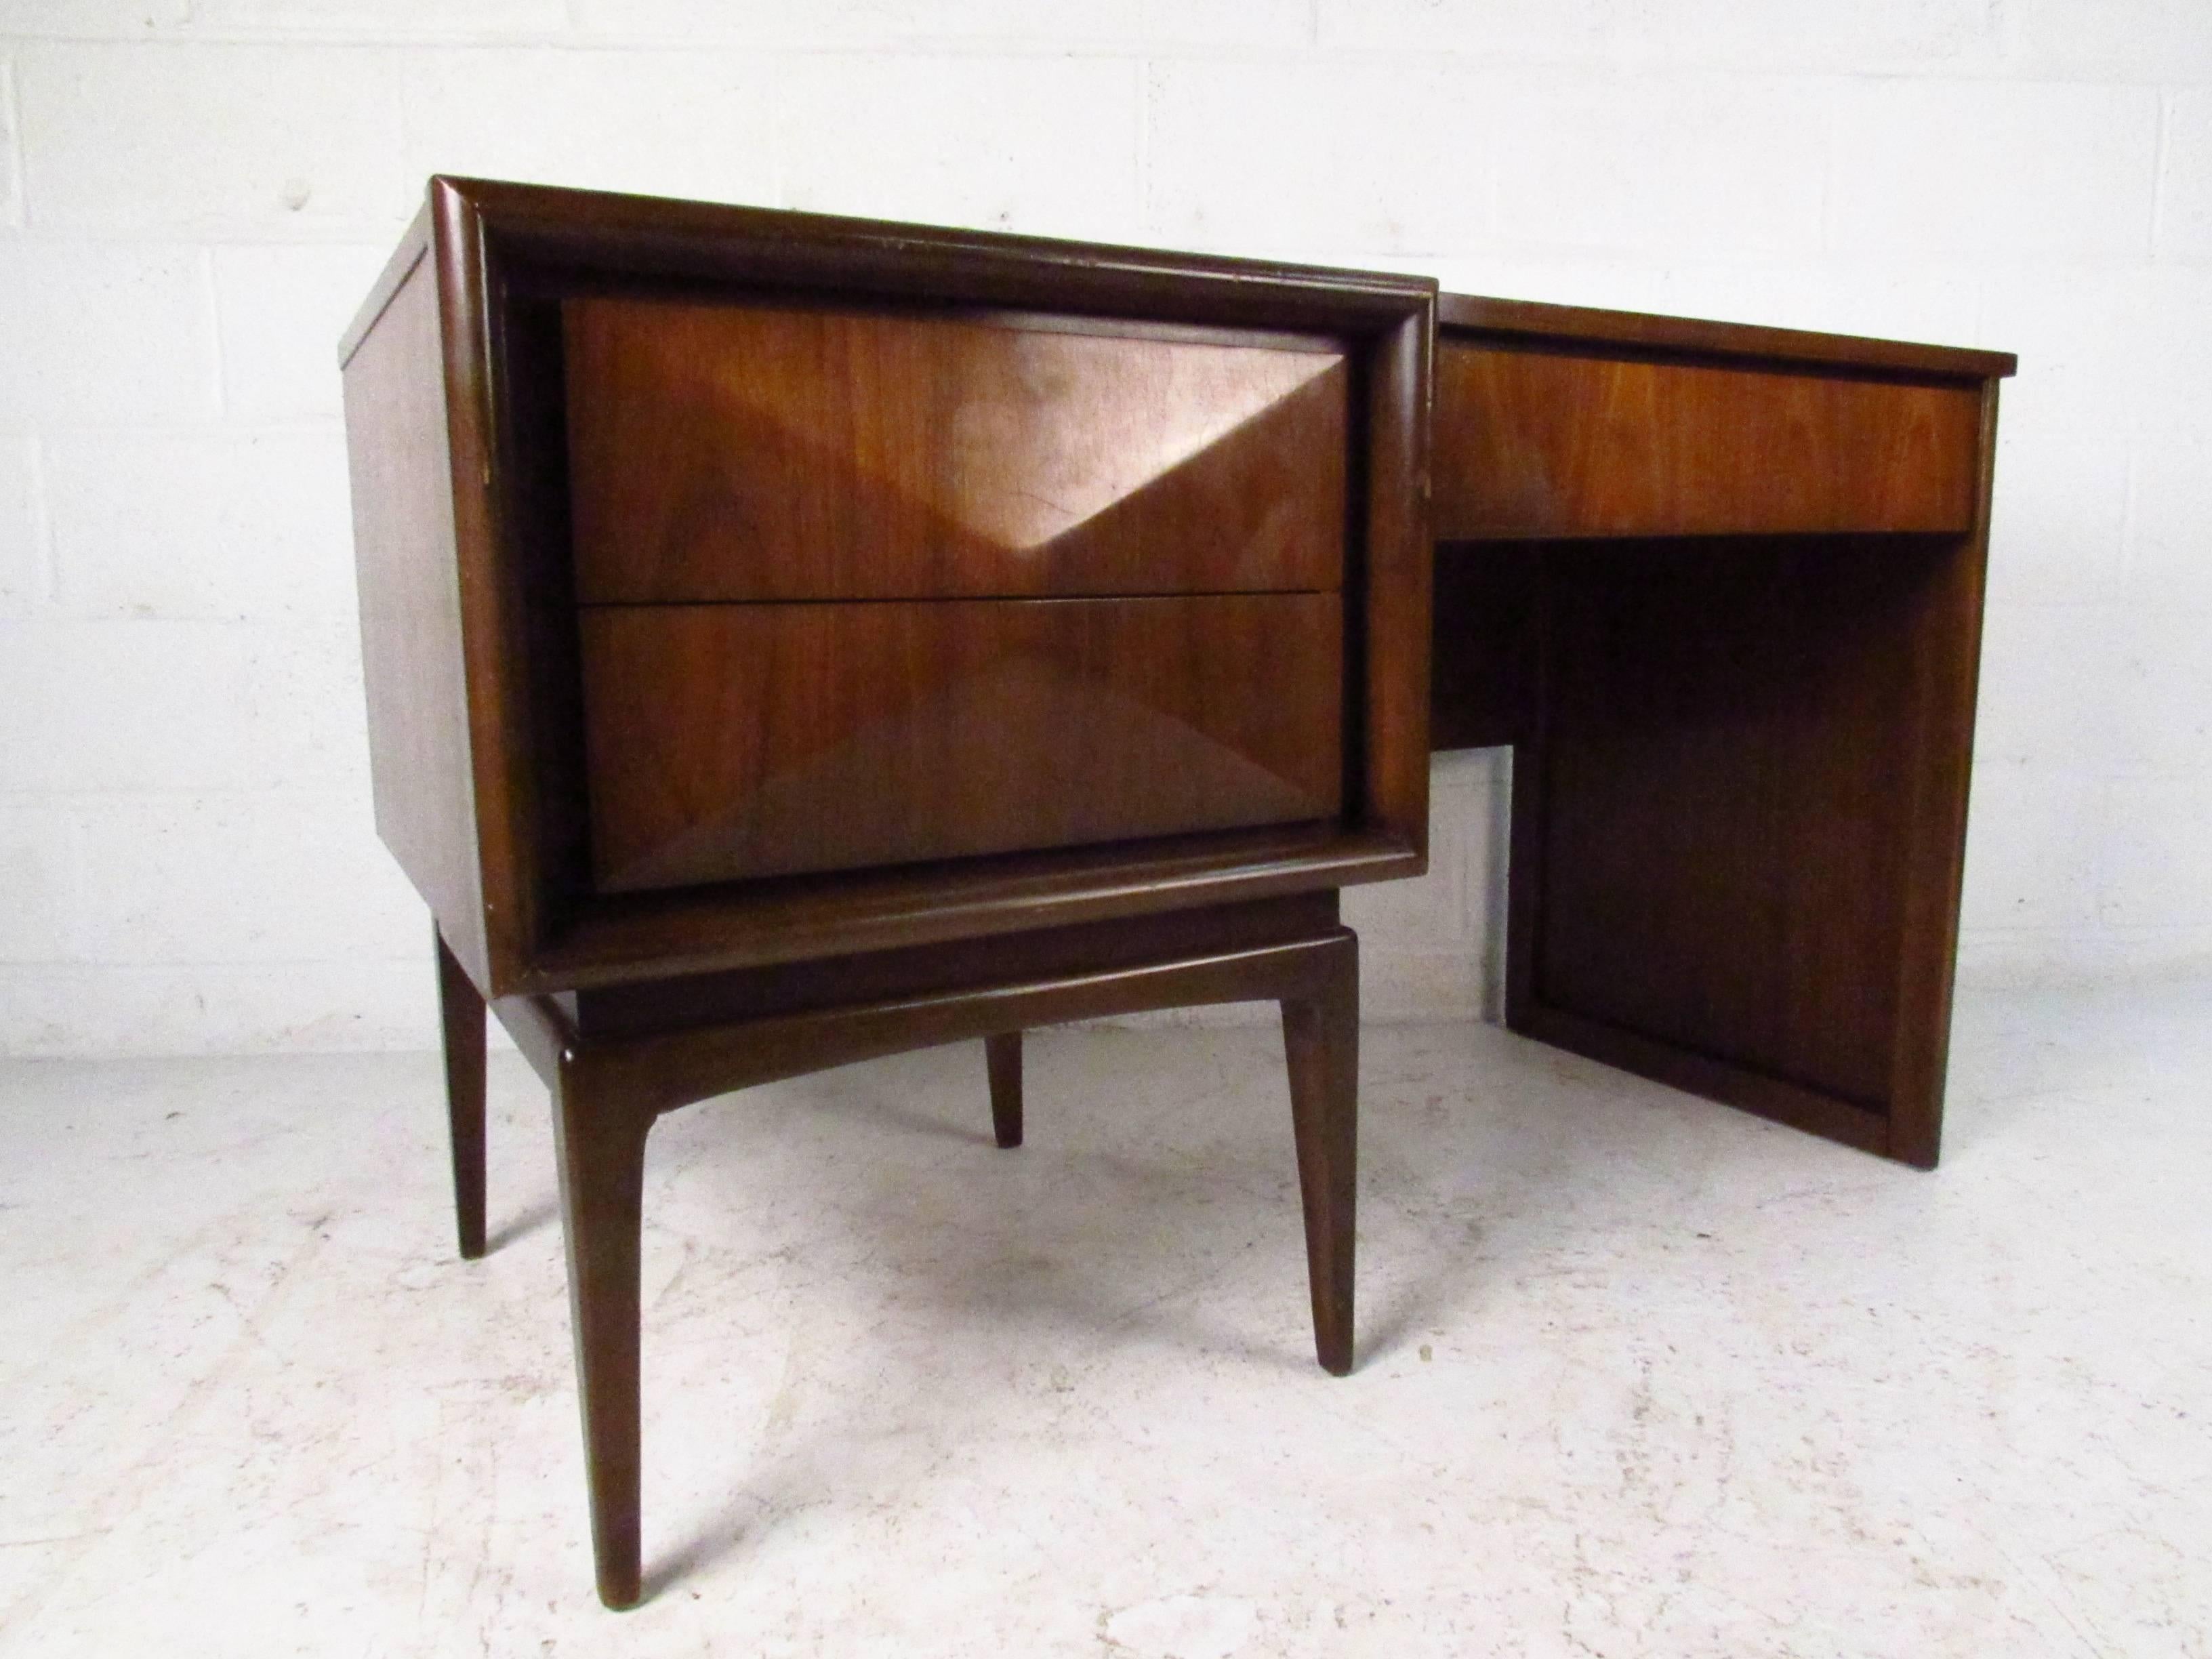 This beautiful Mid-Century walnut desk features a unique sculpted front, tapered legs, and three drawers for workspace storage. Fantastic vintage style in a compact yet practical design, please confirm item location (NY or NJ). Matching end tables